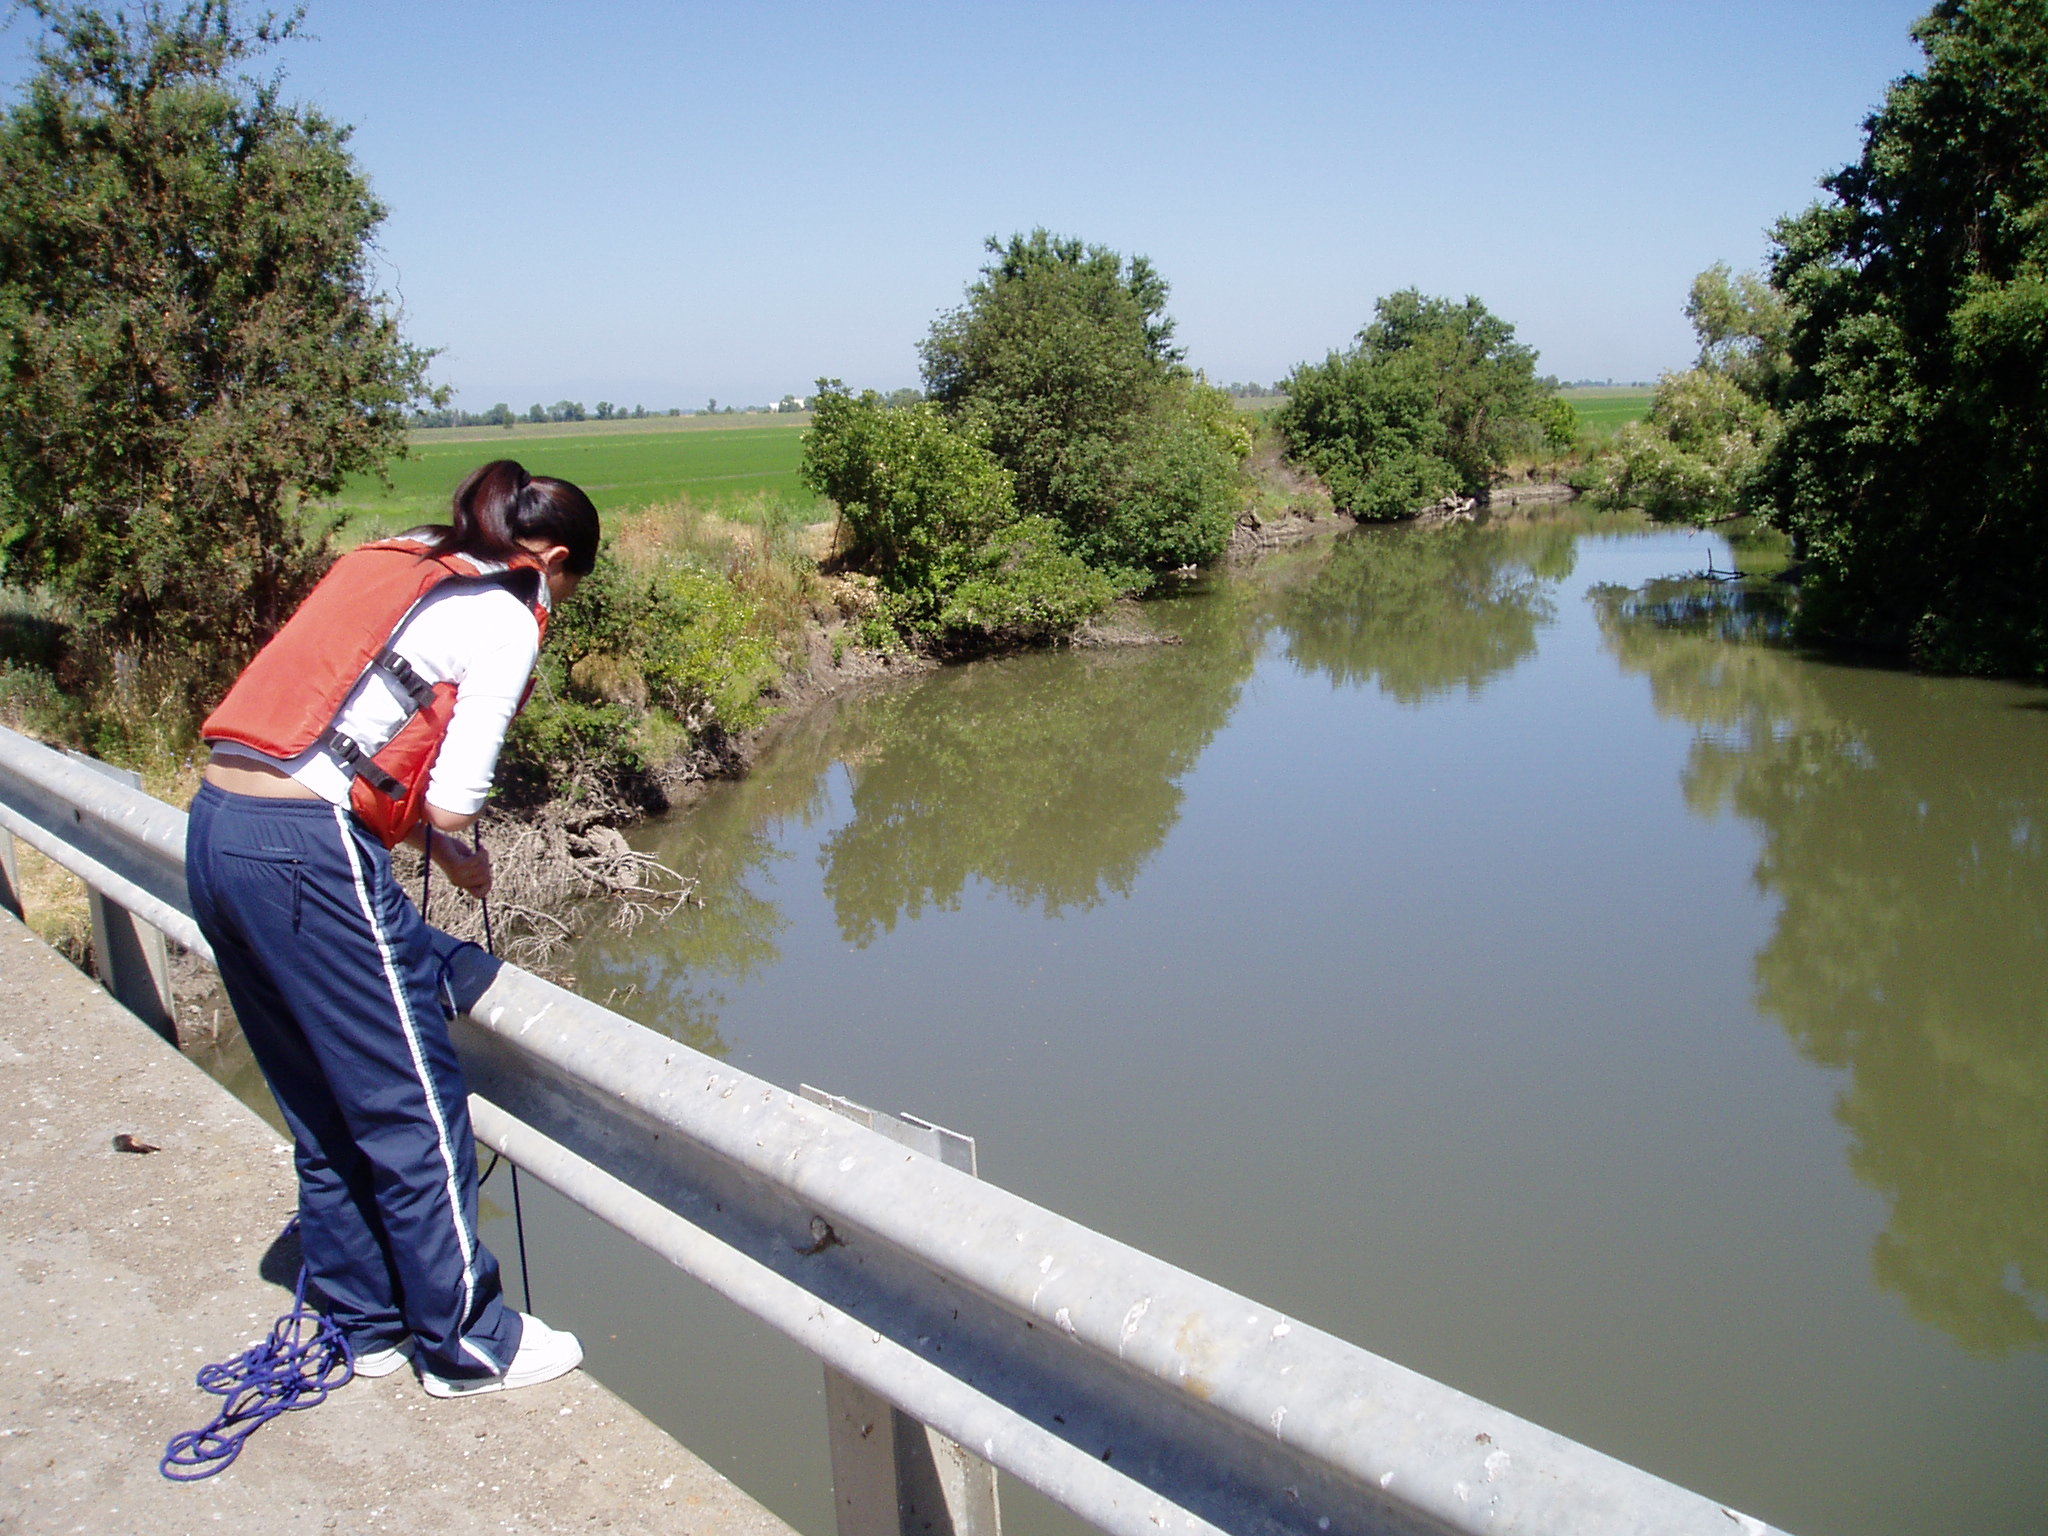 USGS scientist taking a measurement from Butte Creek